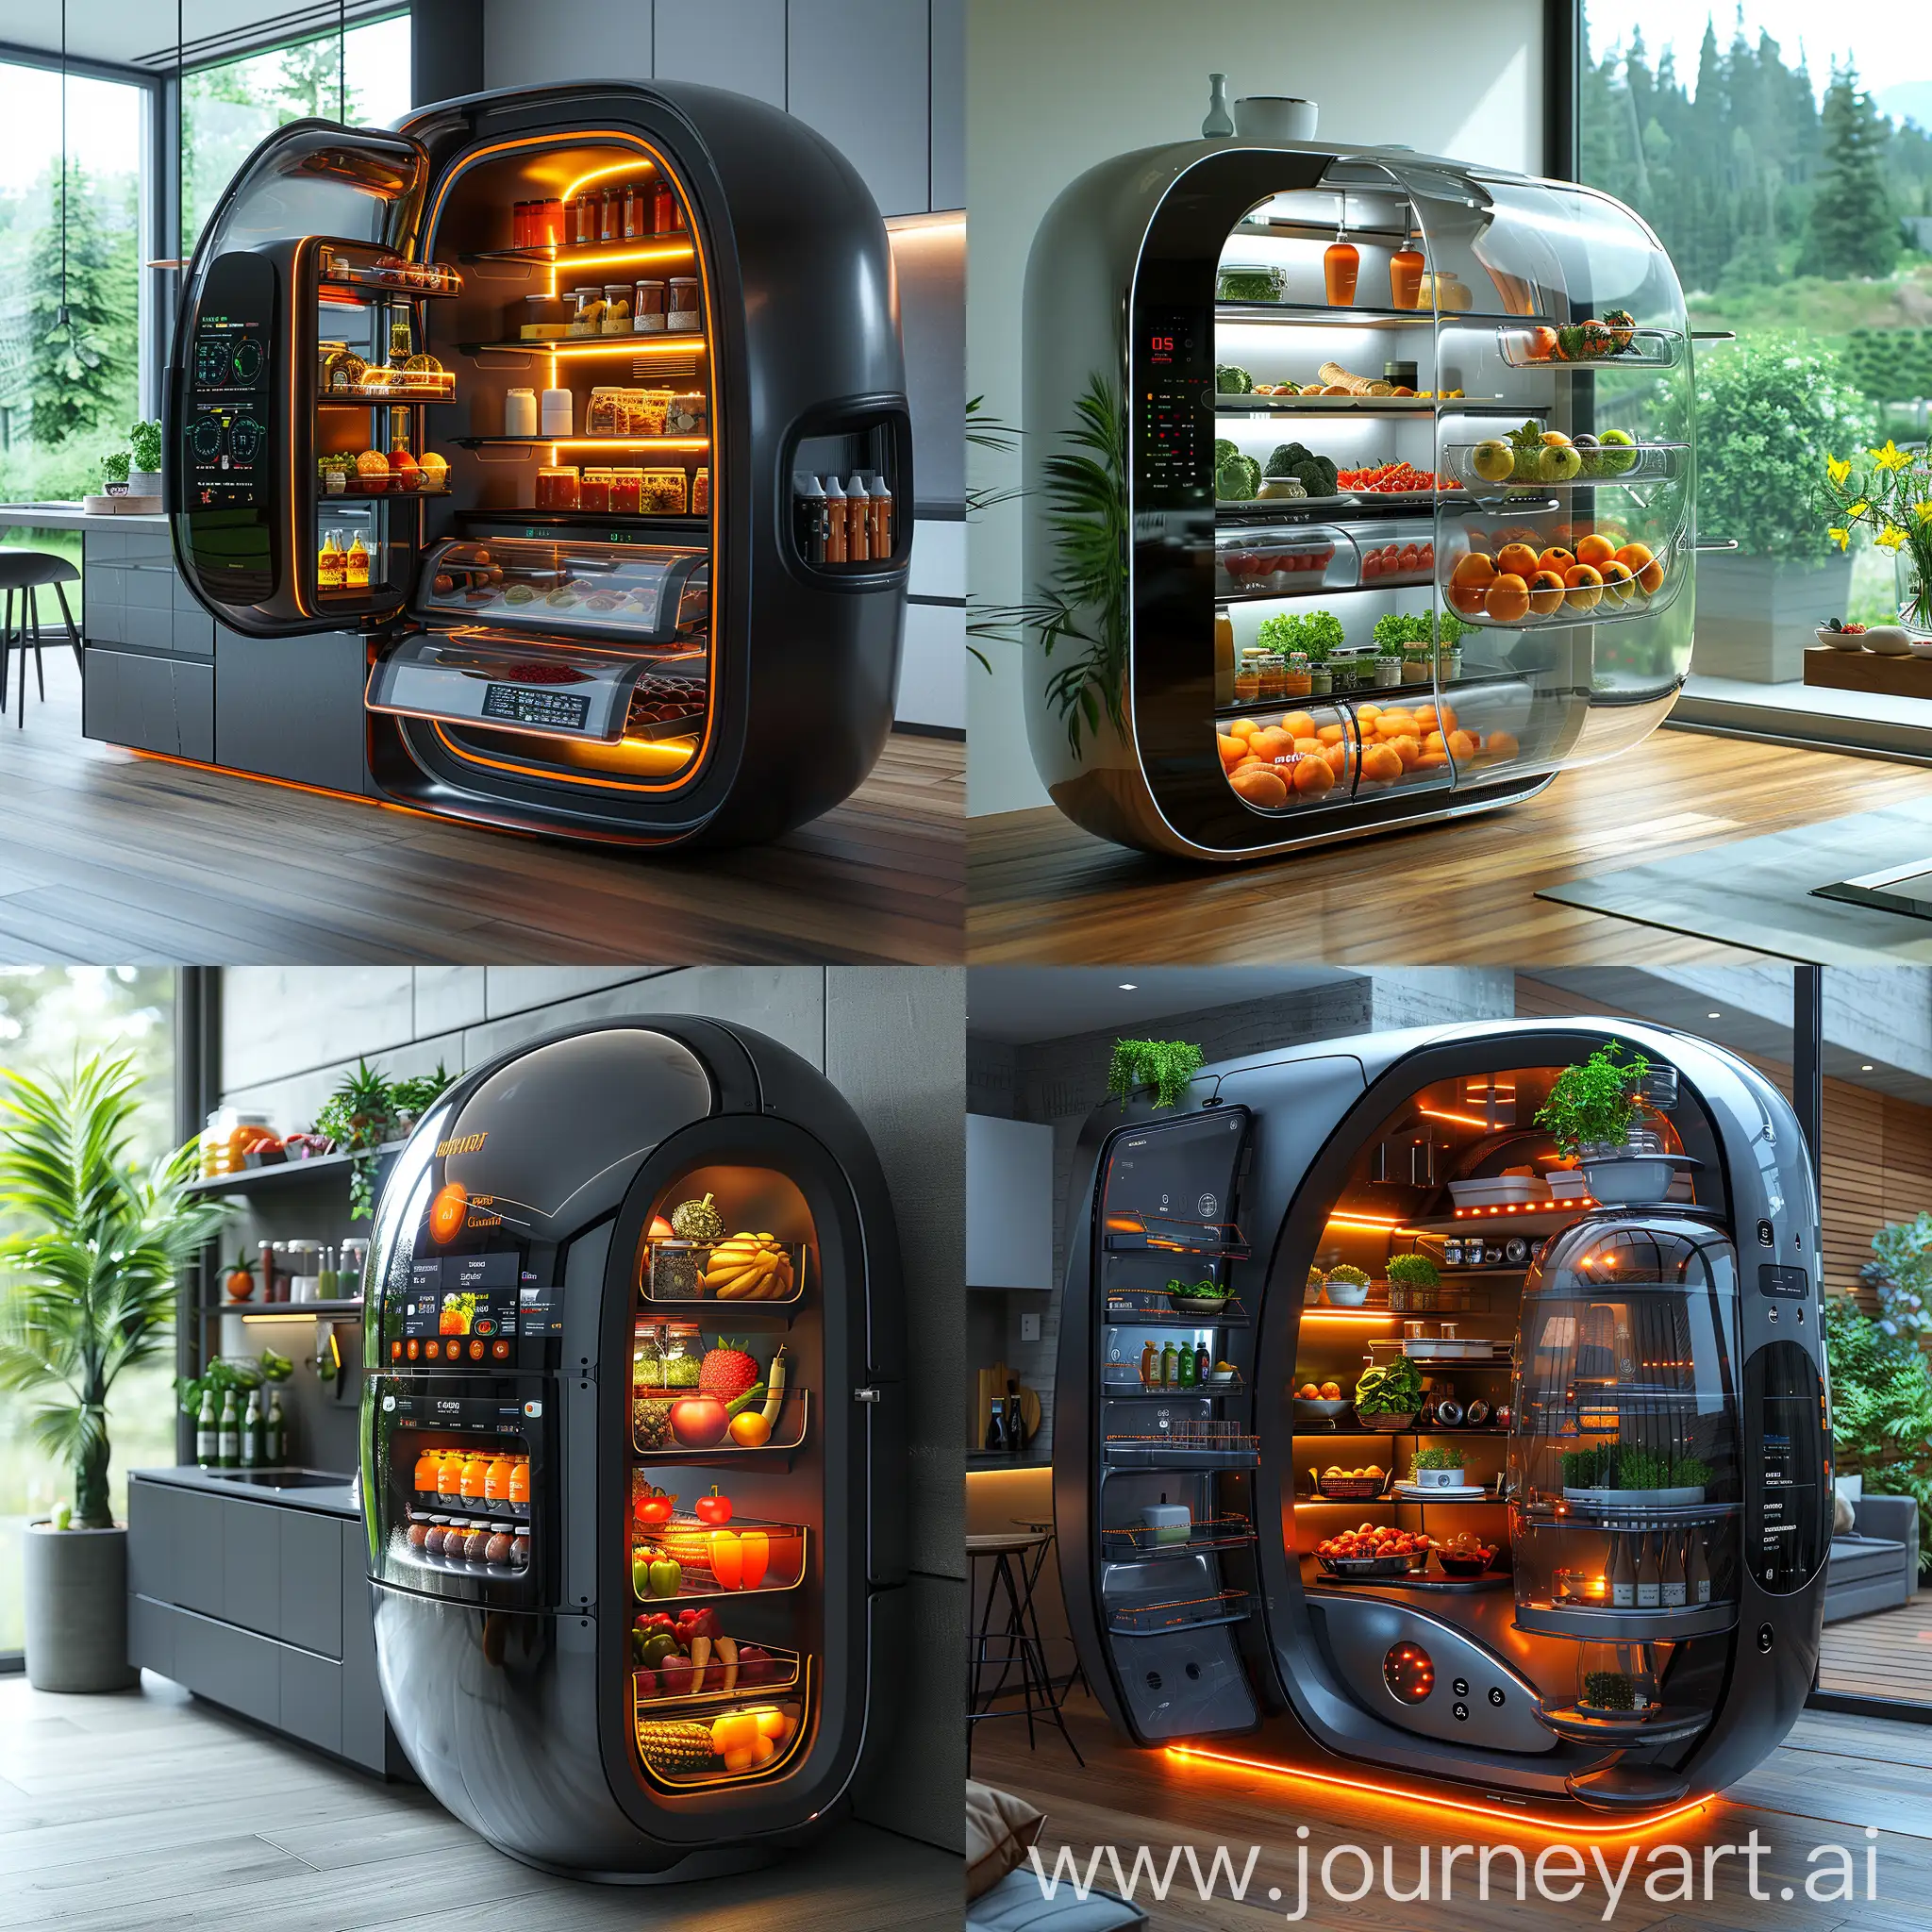 Futuristic fridge, Smart Home Integration, Artificial Intelligence, Interior Cameras, Voice Control, Self-Cleaning Function, Augmented Reality Display, Climate-Controlled Compartments, Energy Efficiency, Built-in Food Scanner, Automatic Inventory Tracking, Modular Shelving, Sliding Drawers, Adjustable Height, Customizable Lighting, Easy-Grip Handles, Hidden Display, Fingerprint-Resistant Coating, Quiet Operation, Adaptive Cooling Zones, Space-Saving Design, octane render --stylize 1000